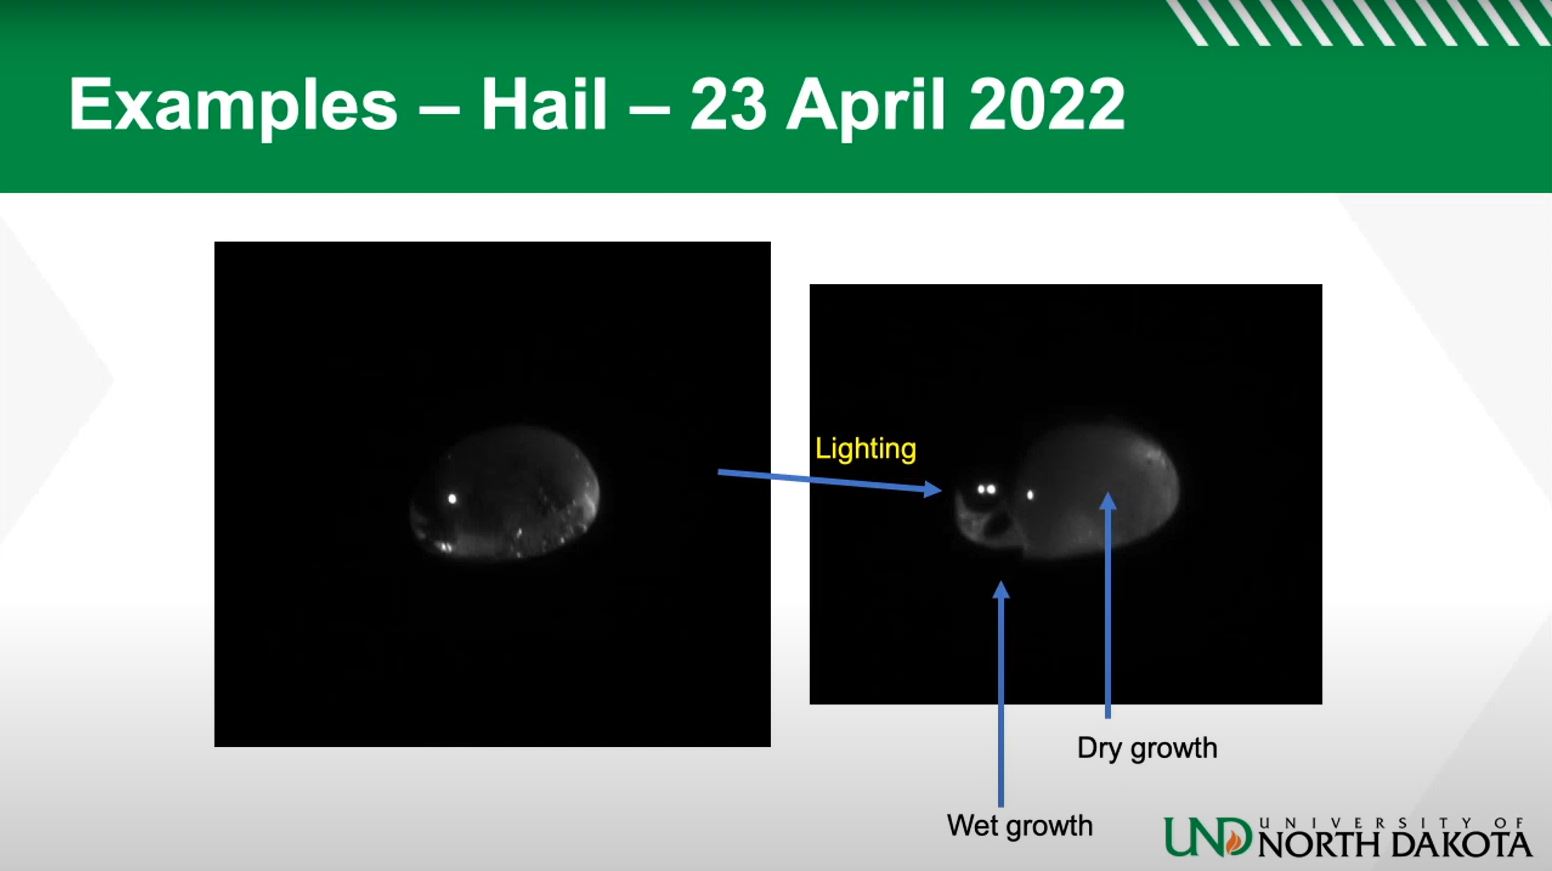 This slide shows an example of a hailstone image from April 23, 2022, with the labels "lighting," "wet growth" and "dry growth."